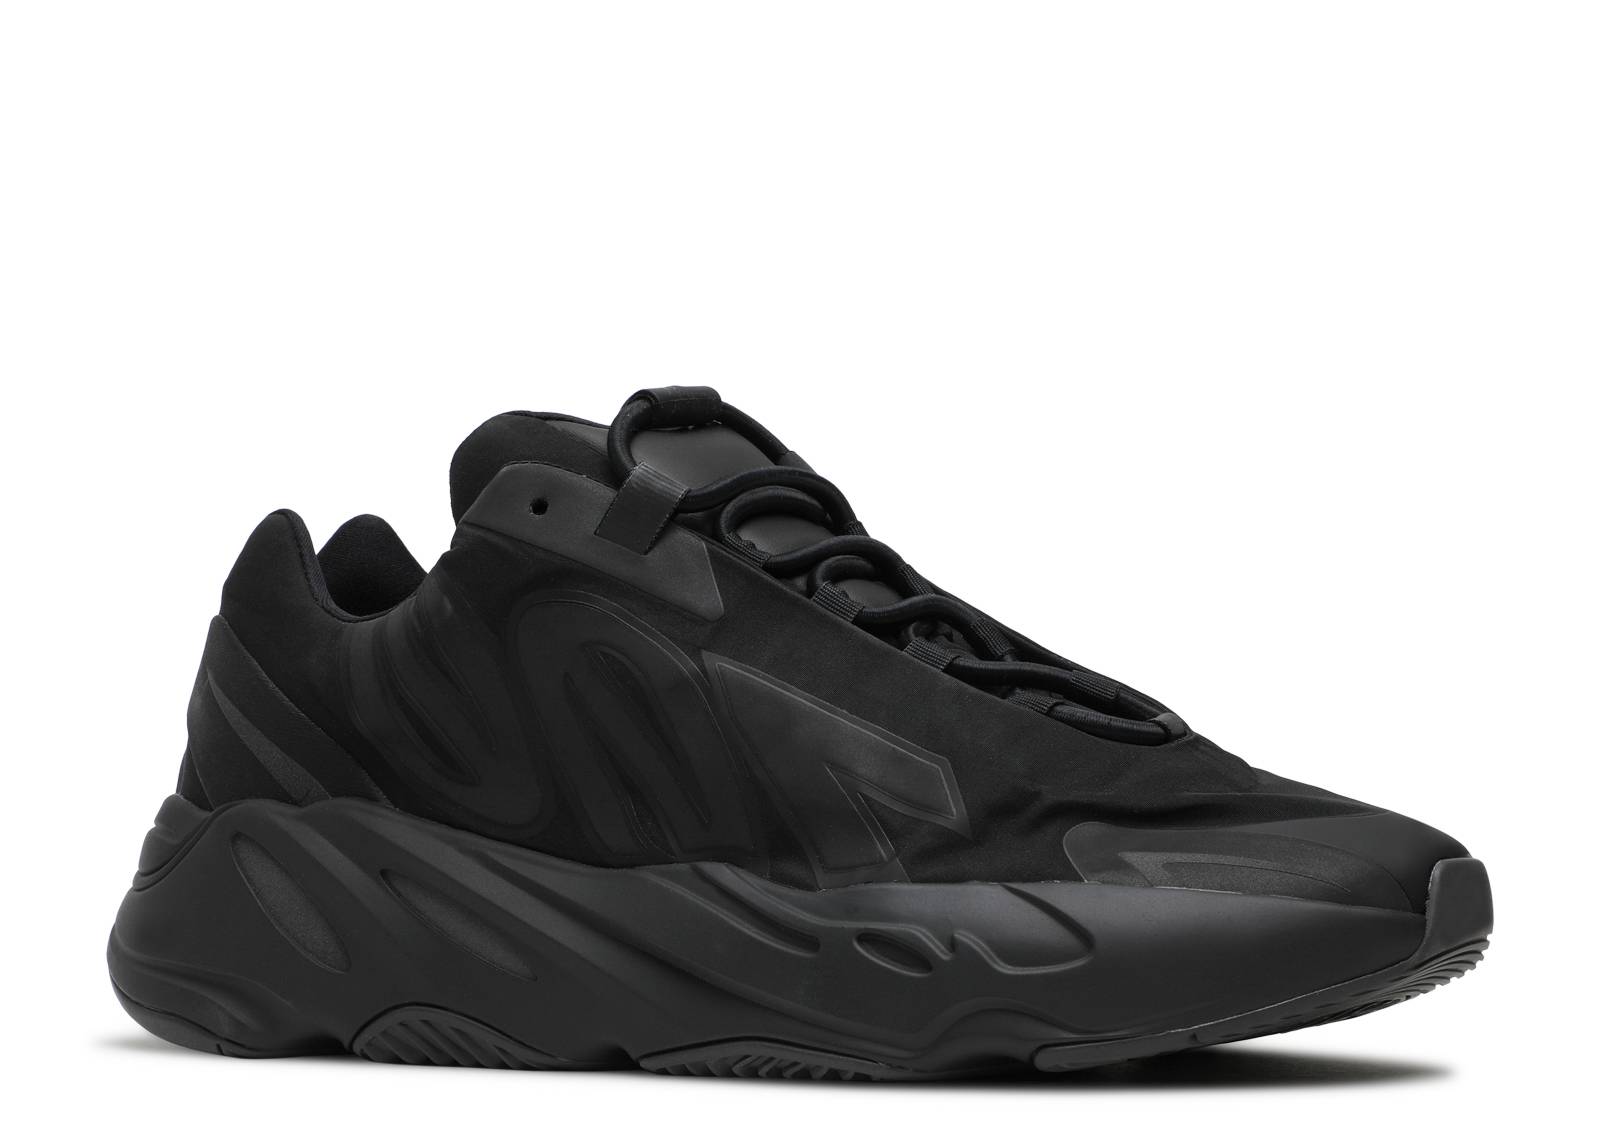 Yeezy Boost 700 adidas montreal 76 size conversion chart